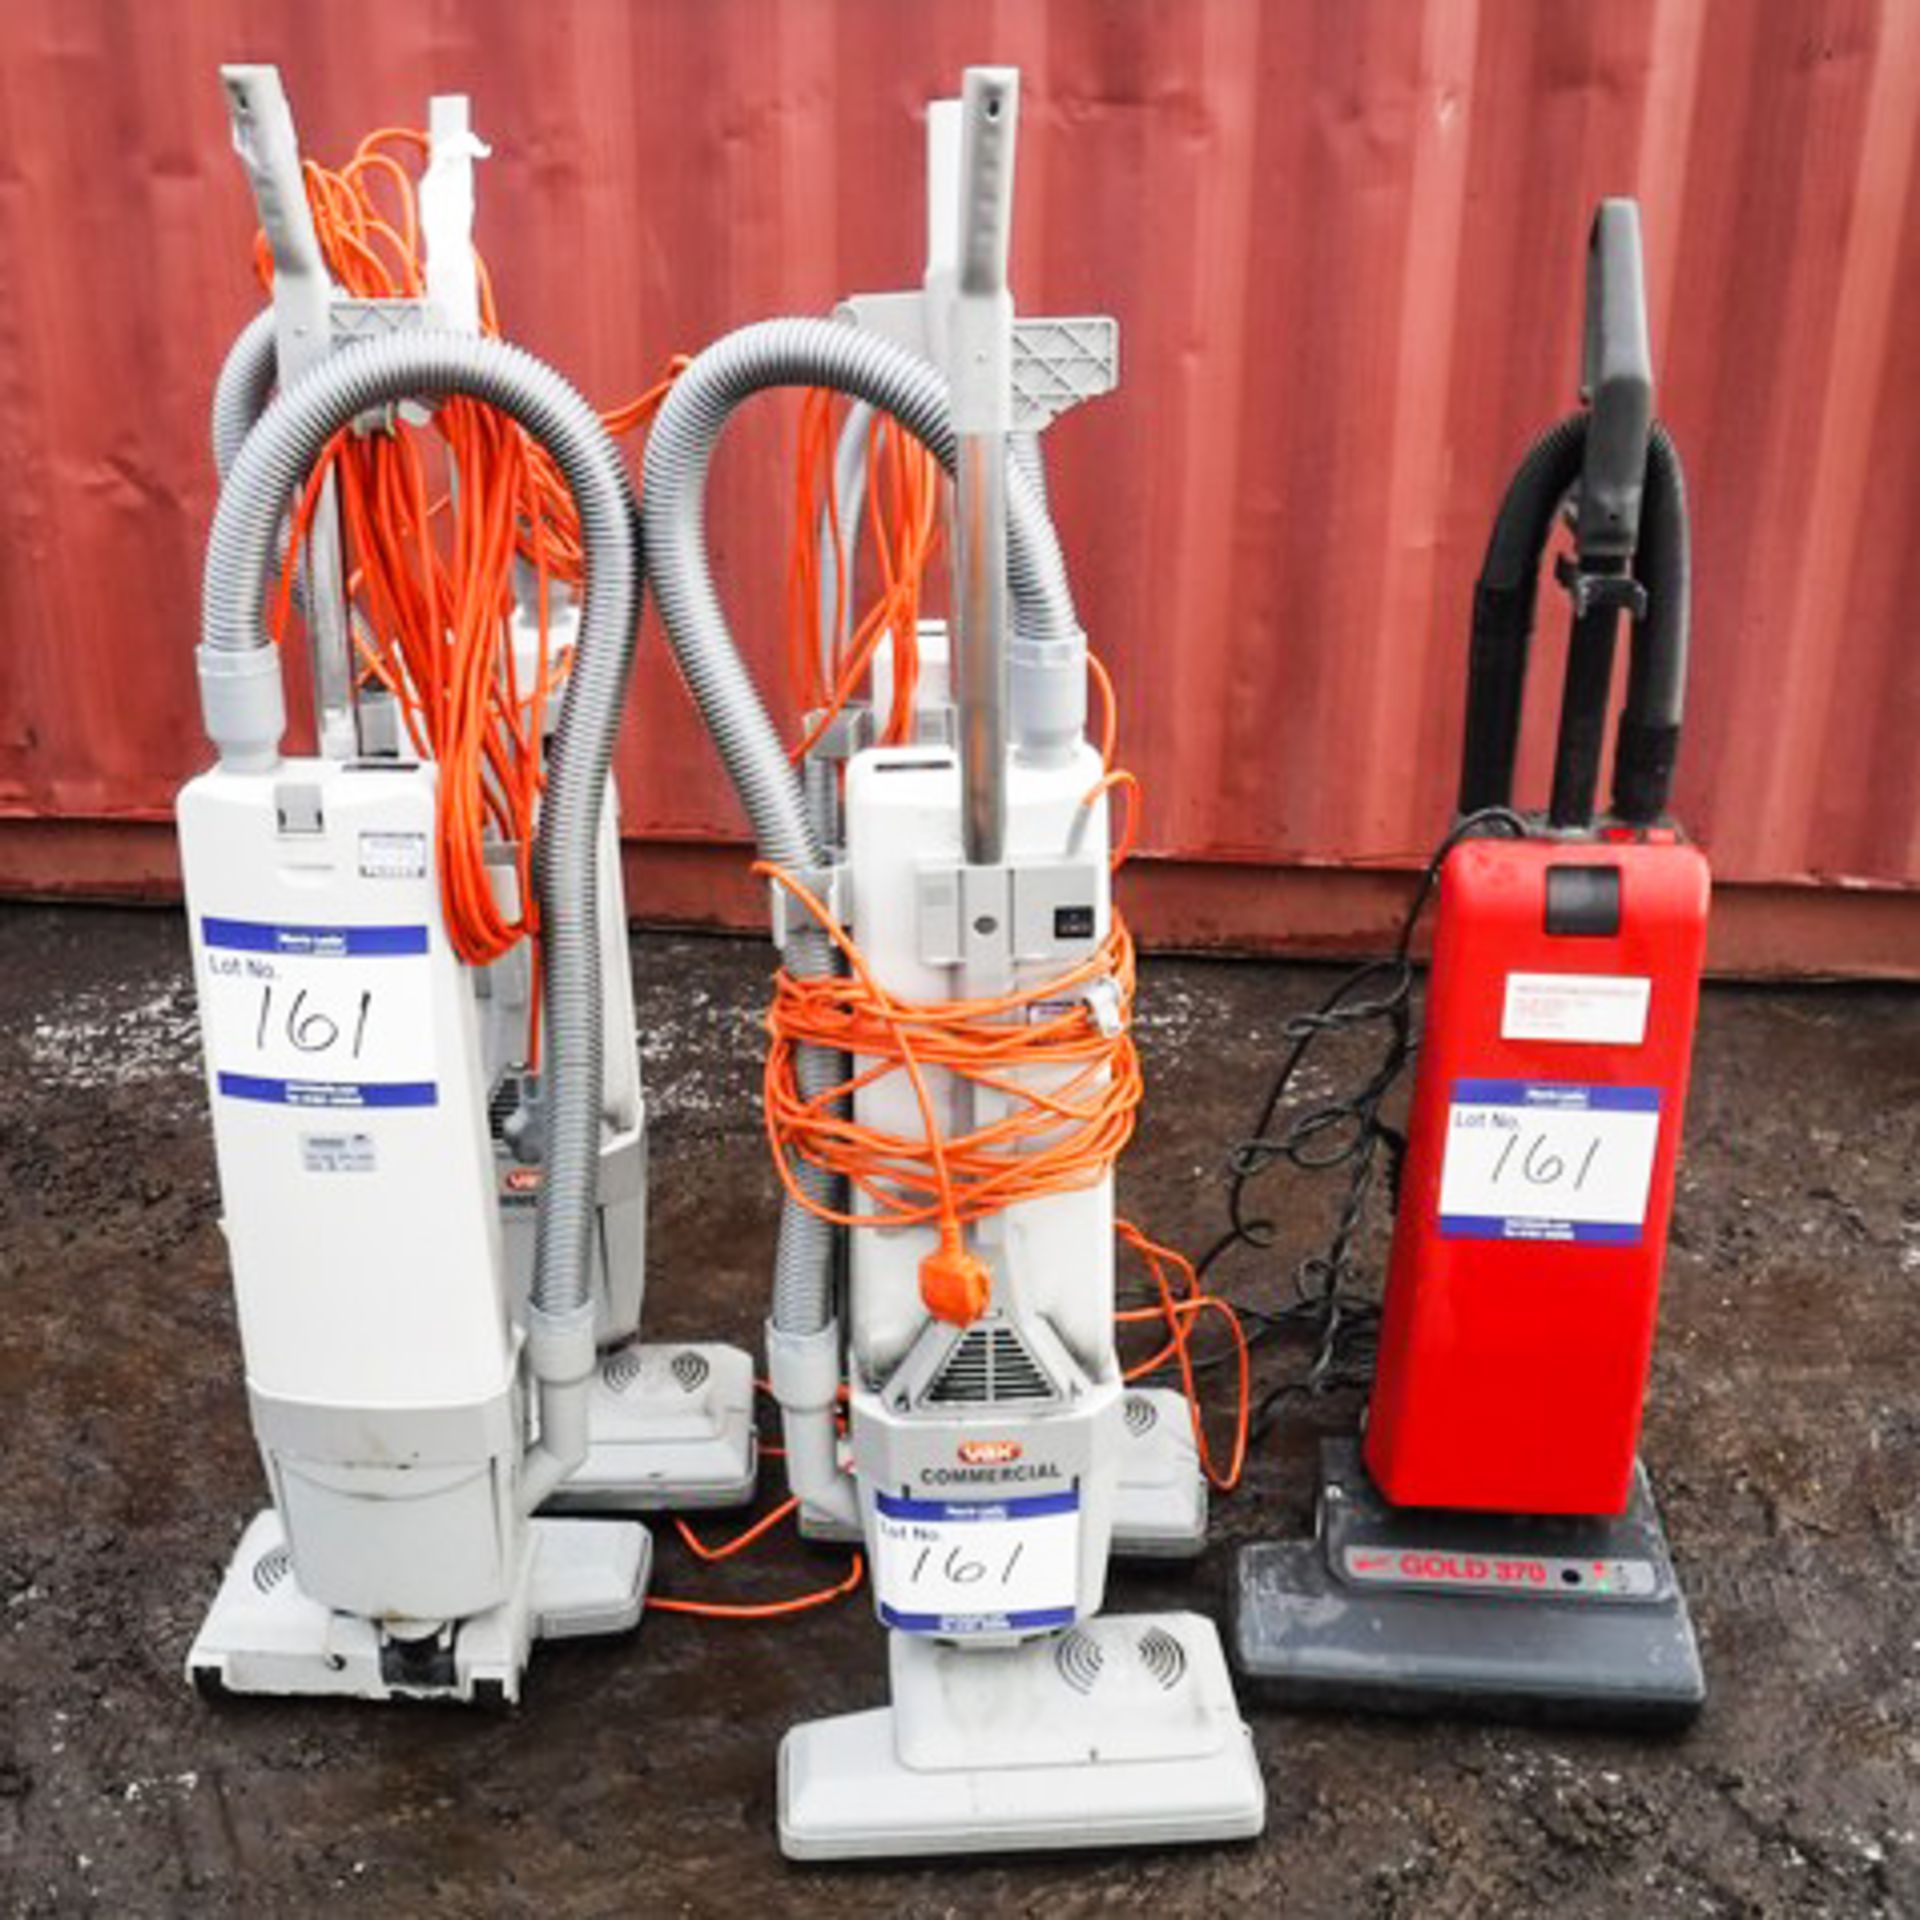 4 X VAX VCU-03 & VICTOR GOLD 370 VACUUMS - Image 2 of 2